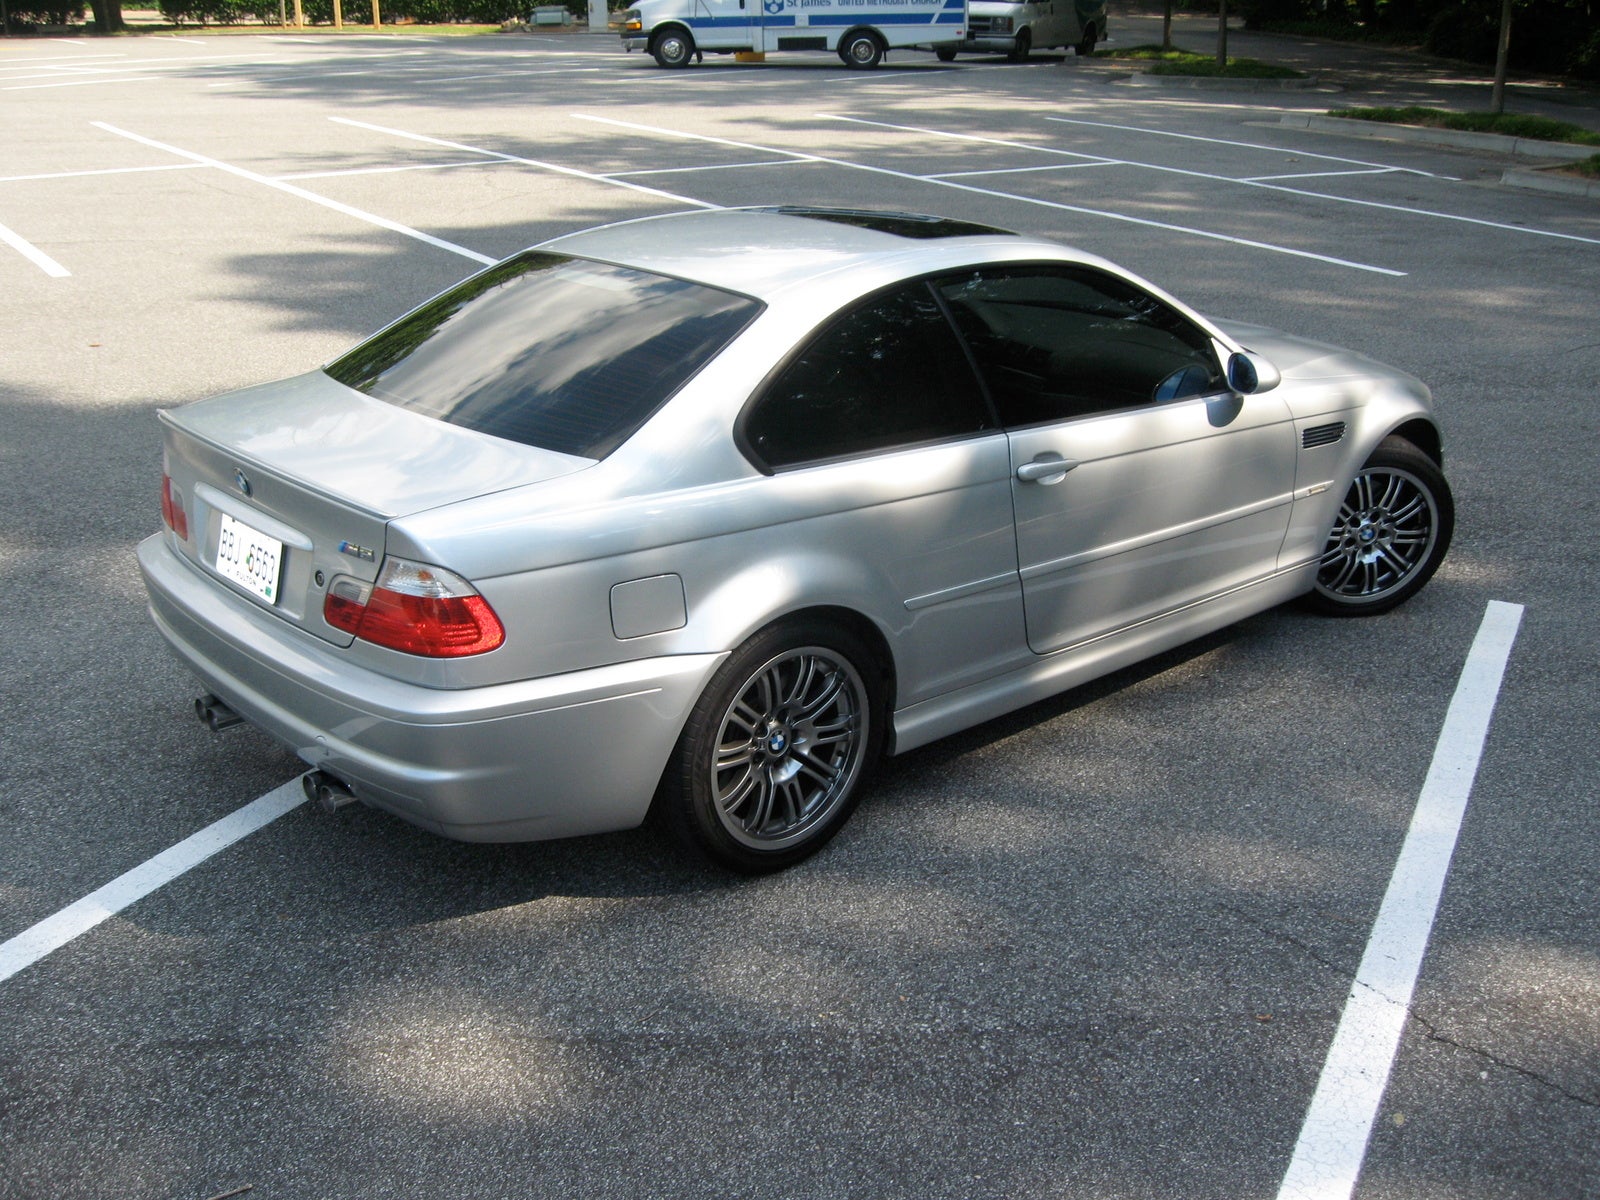 2001 BMW M3 - Pictures - 2001 BMW M3 Coupe picture - CarGurus